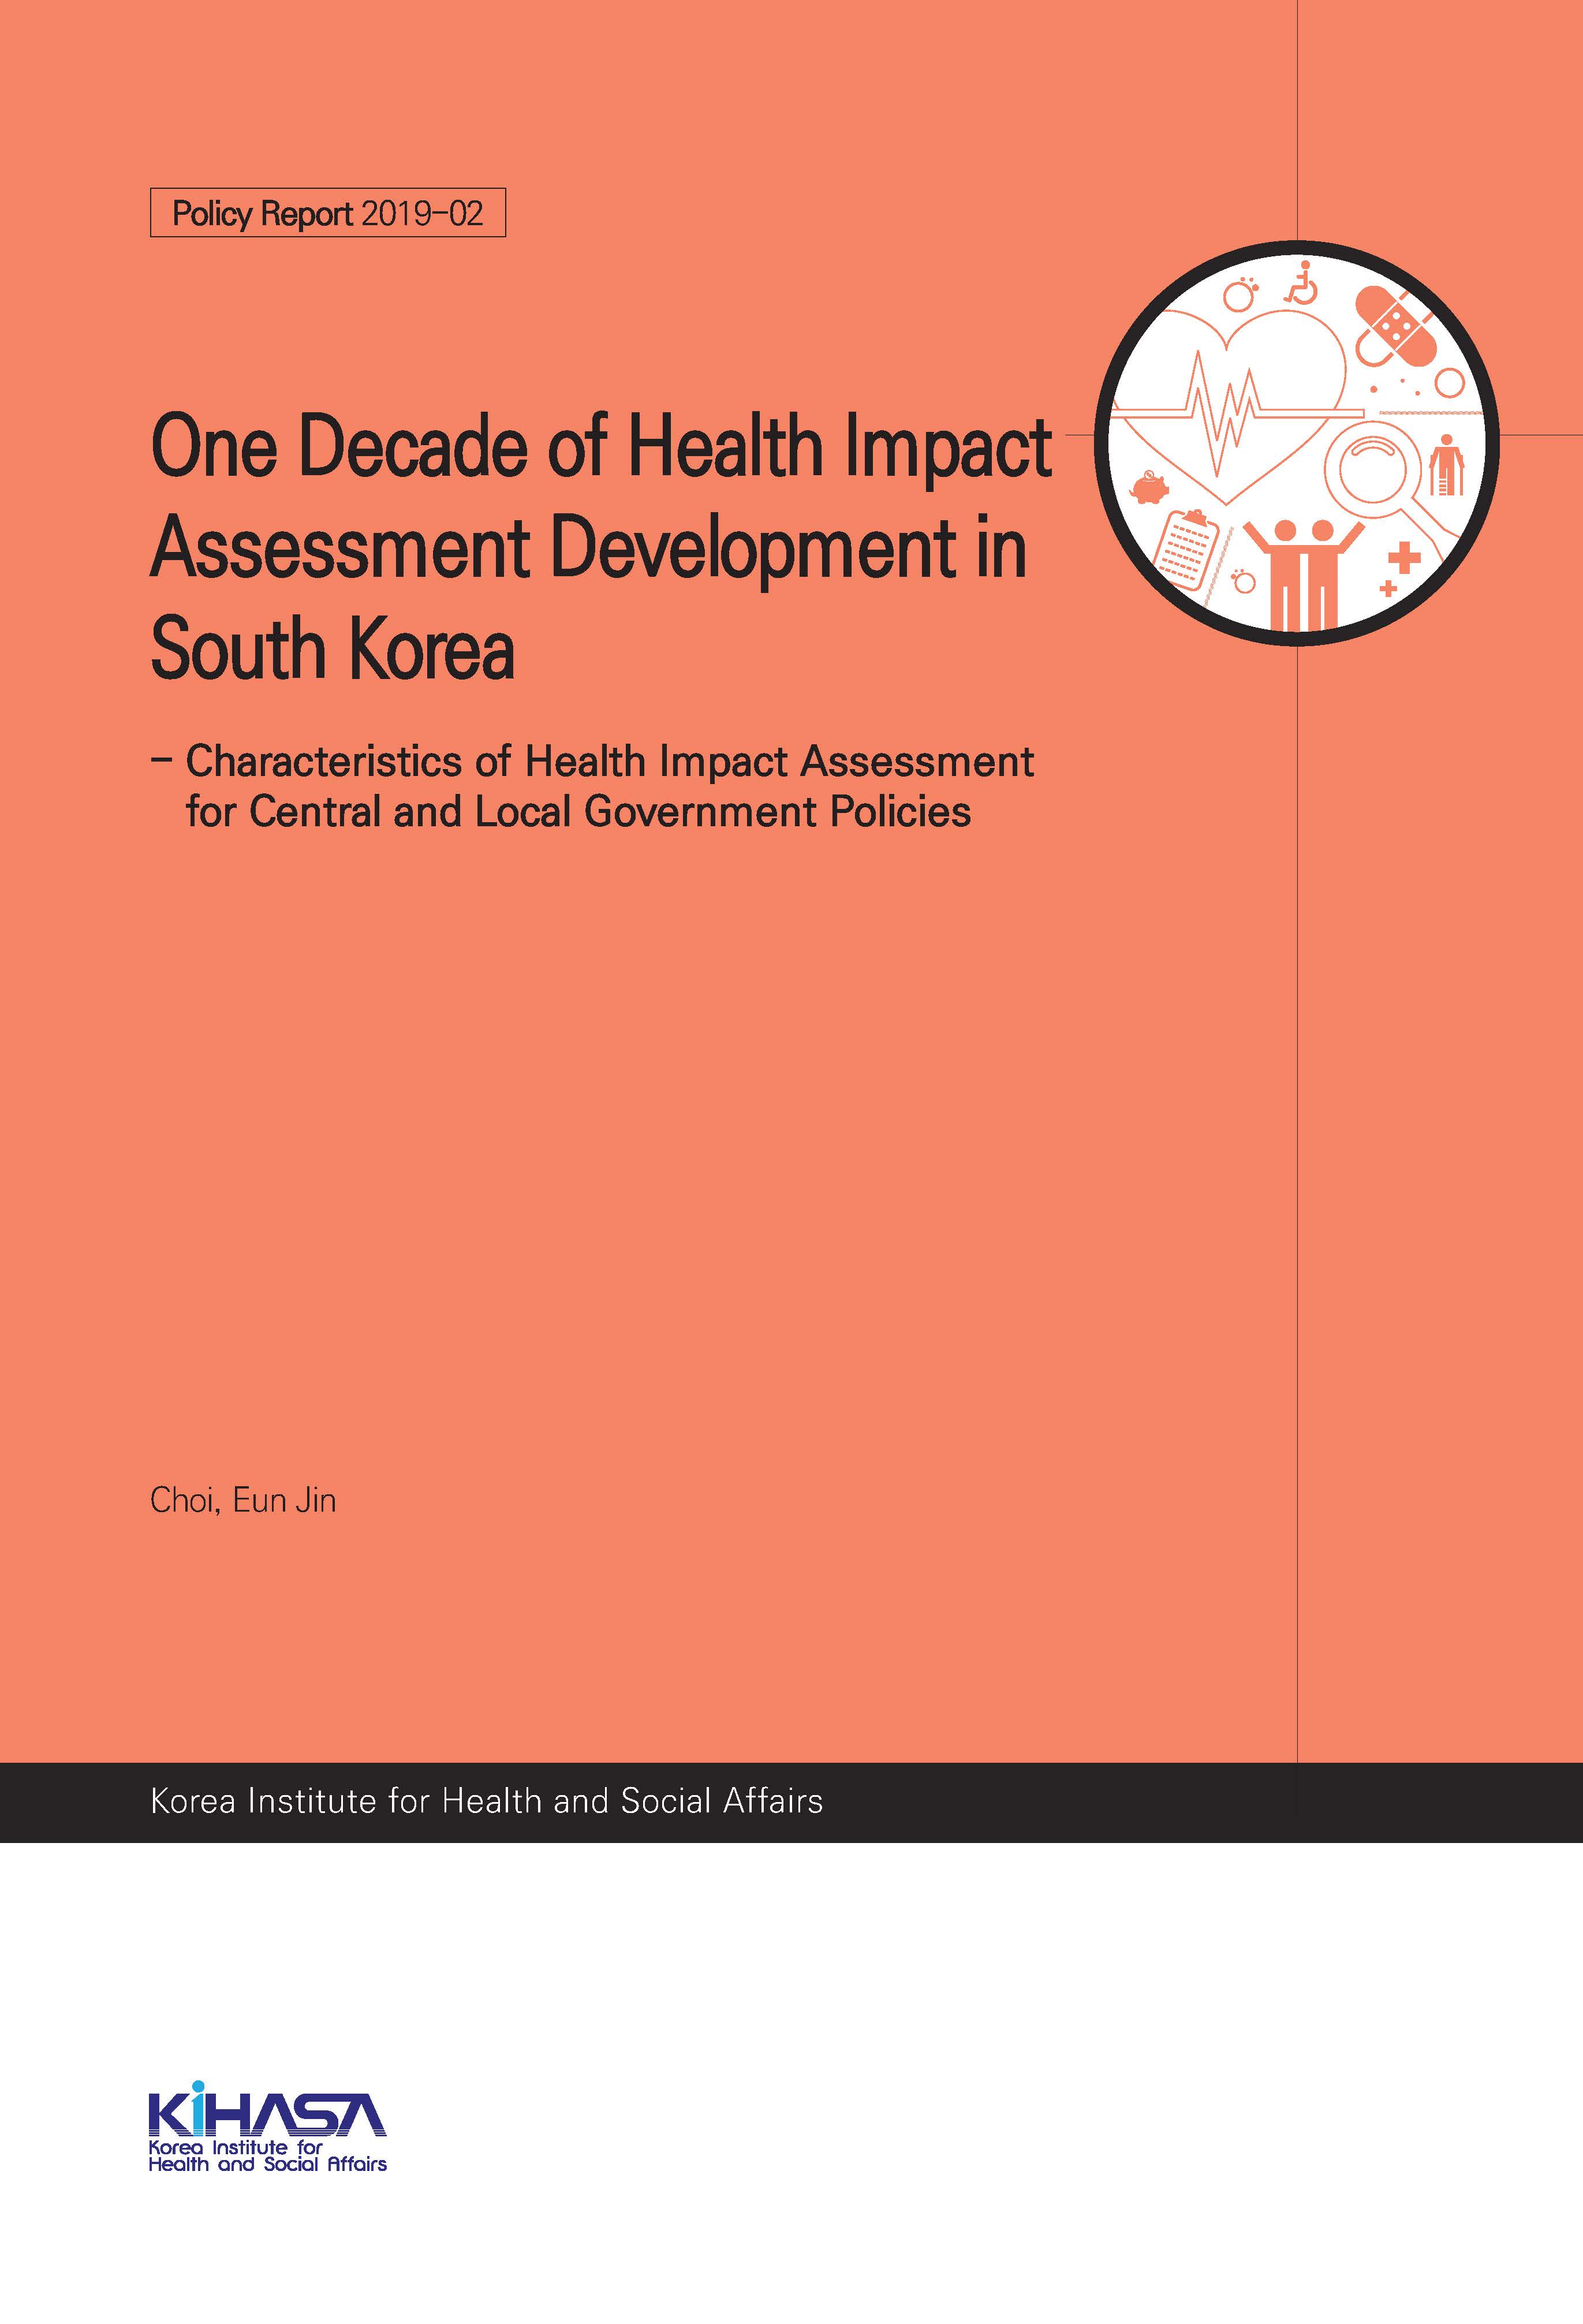 One Decade of Health Impact Assessment Development in South Korea: Characteristics of Health Impact Assessment for Central and Local Government Policies